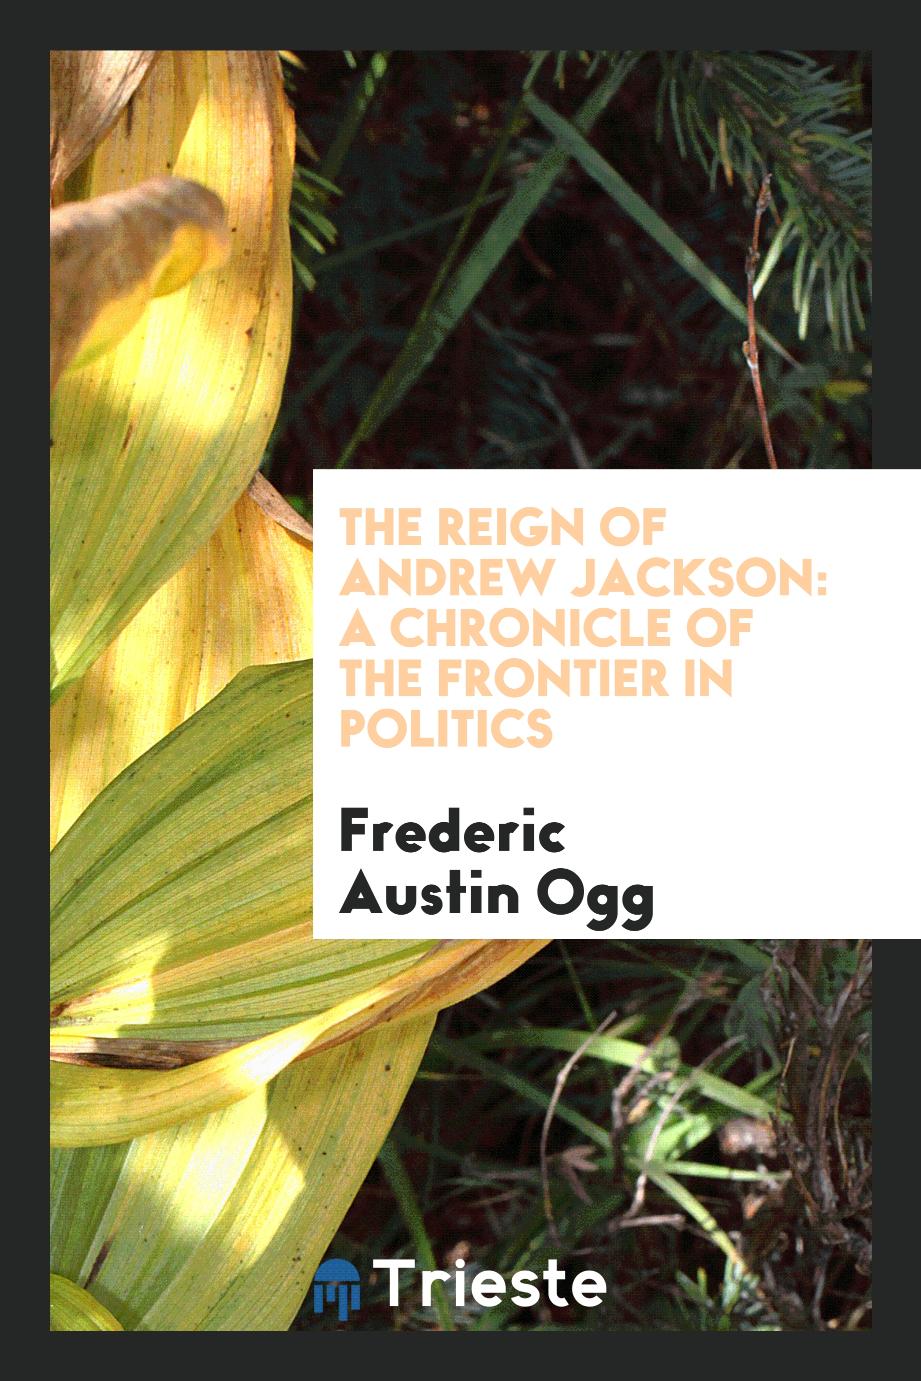 The reign of Andrew Jackson: a chronicle of the frontier in politics